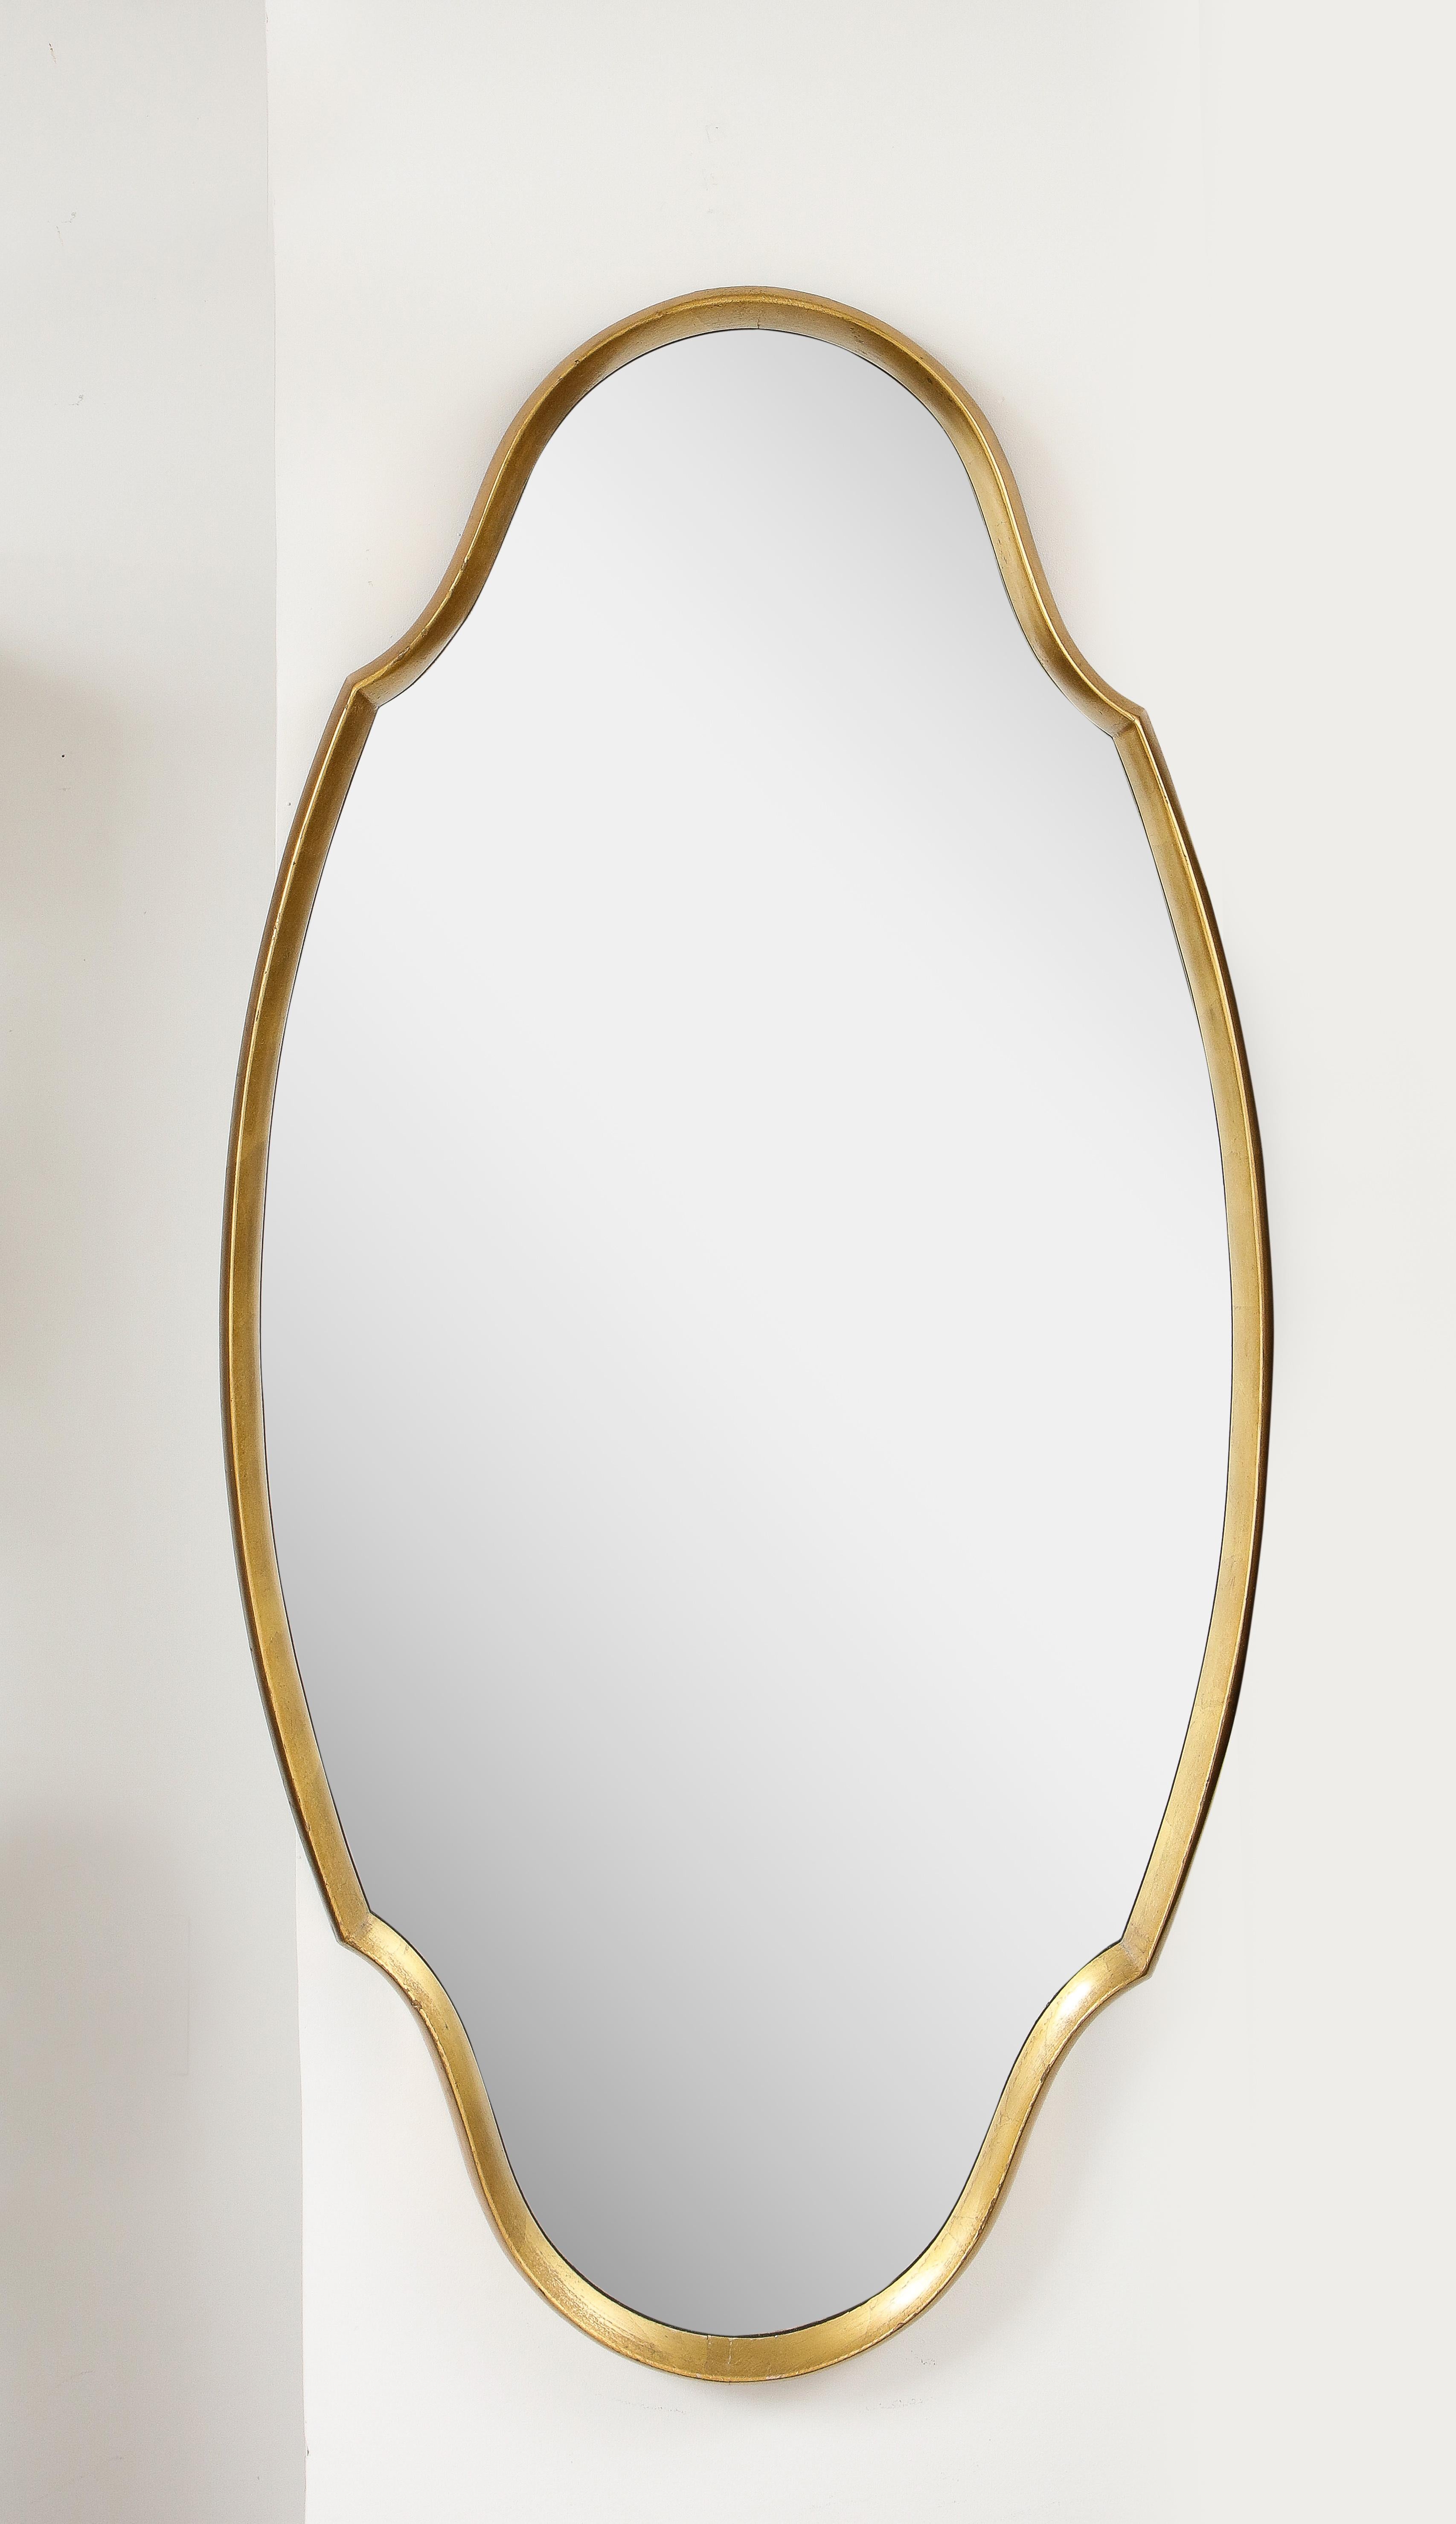 1960's Mid-Century Modern Gold Leaf Mirror in the Style of La Barge For Sale 3